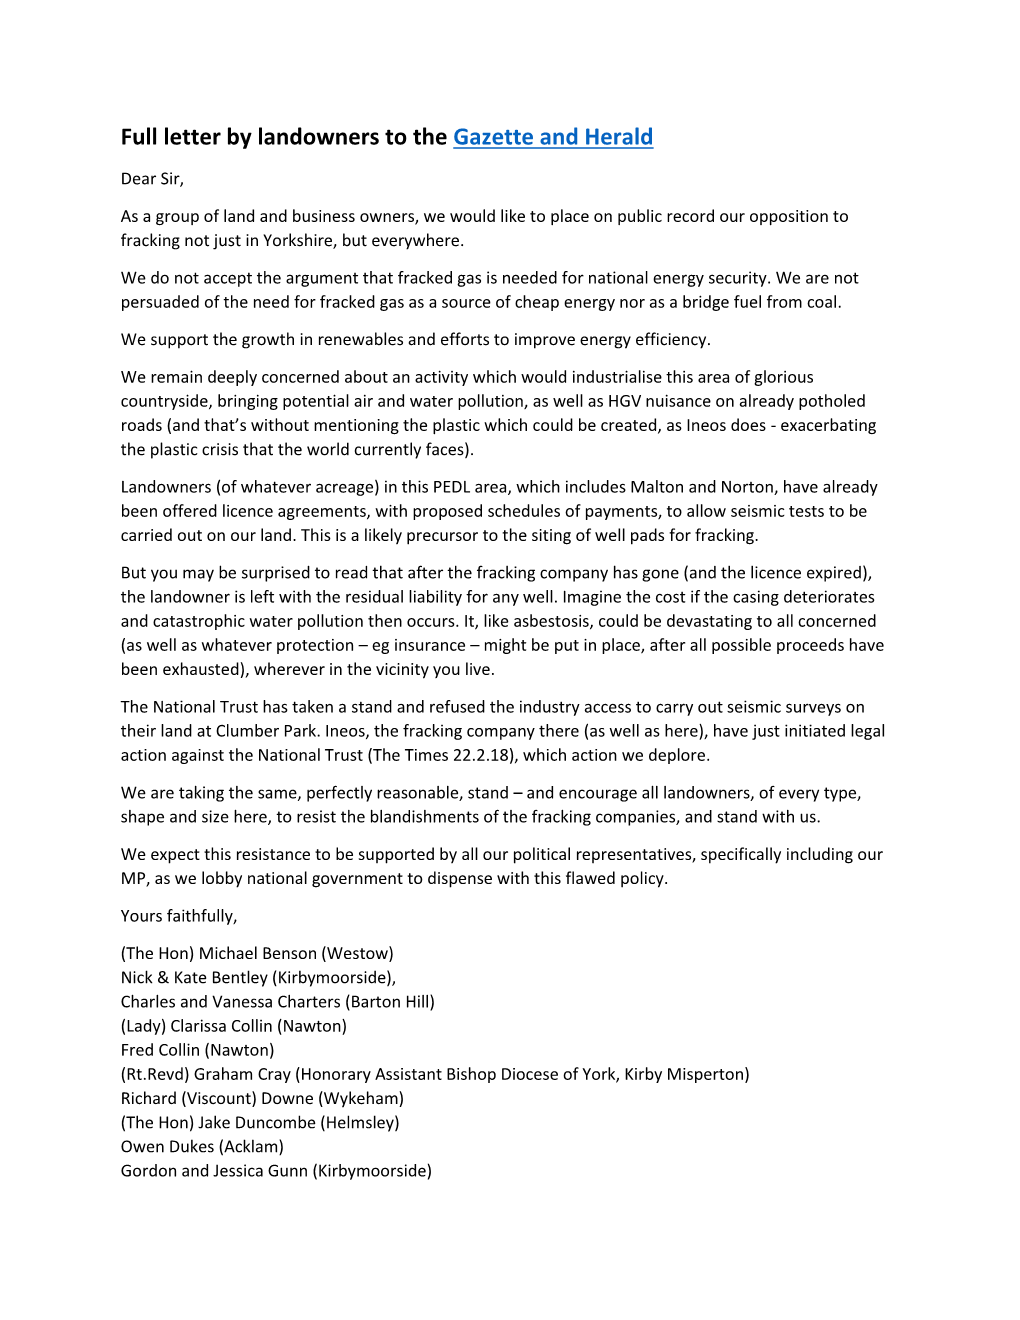 Full Letter by Landowners to the Gazette and Herald